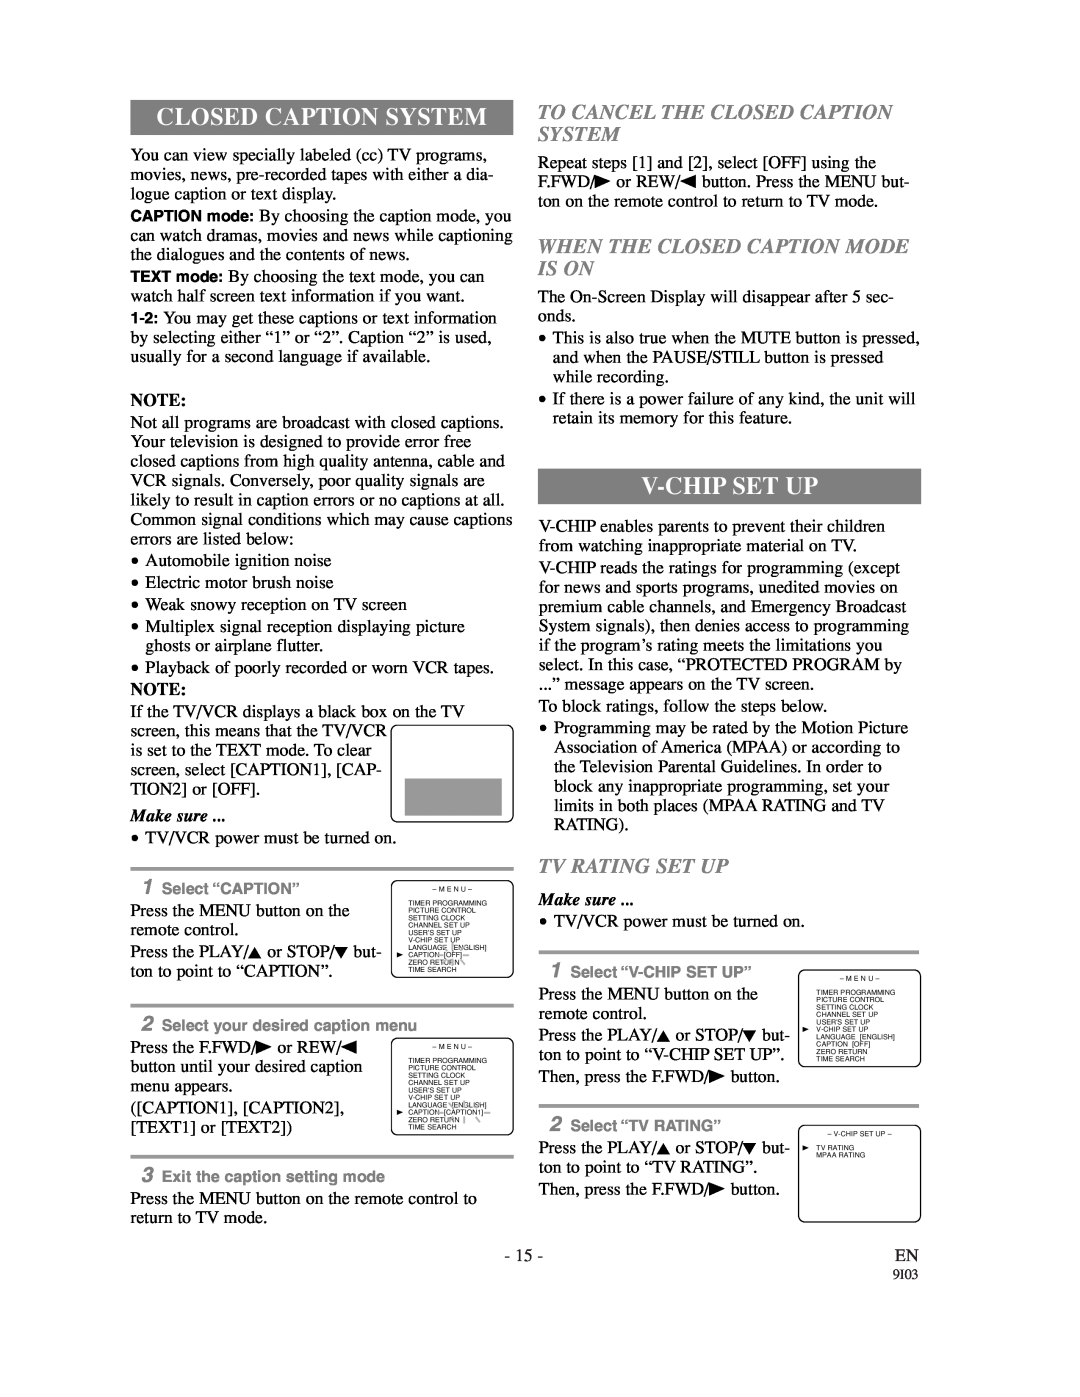 Sylvania 6313CC owner manual V-Chip Set Up, To Cancel The Closed Caption System, When The Closed Caption Mode Is On 